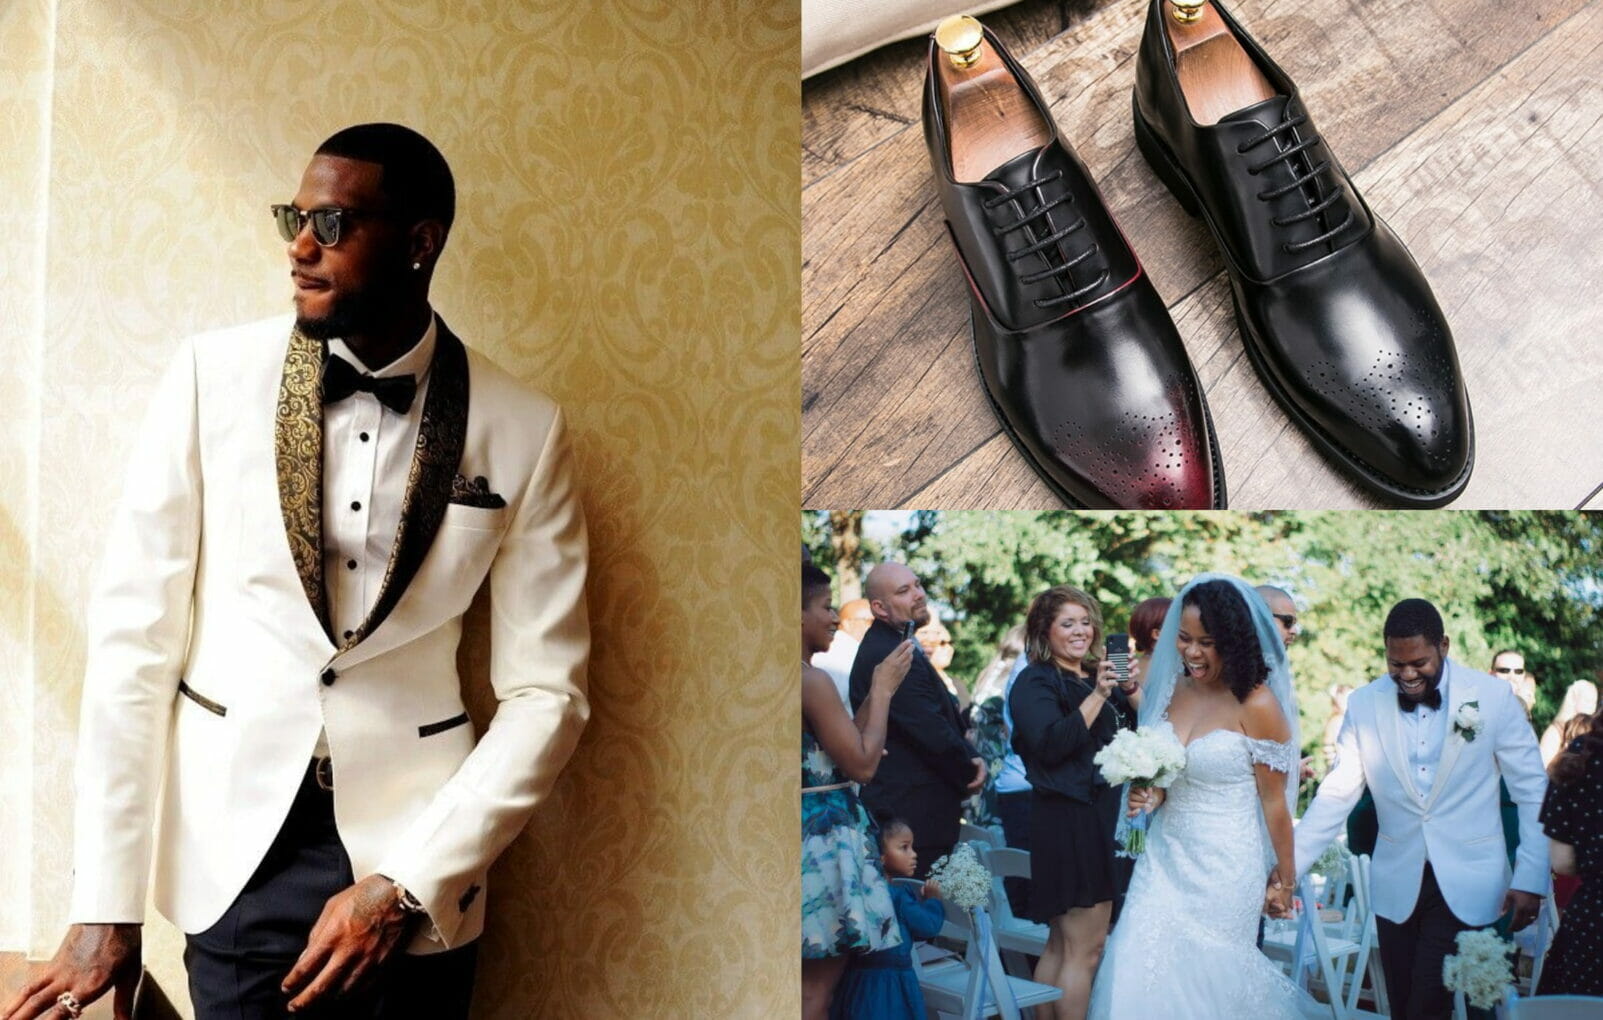 Fashion Rules That Every Groom Should Follow